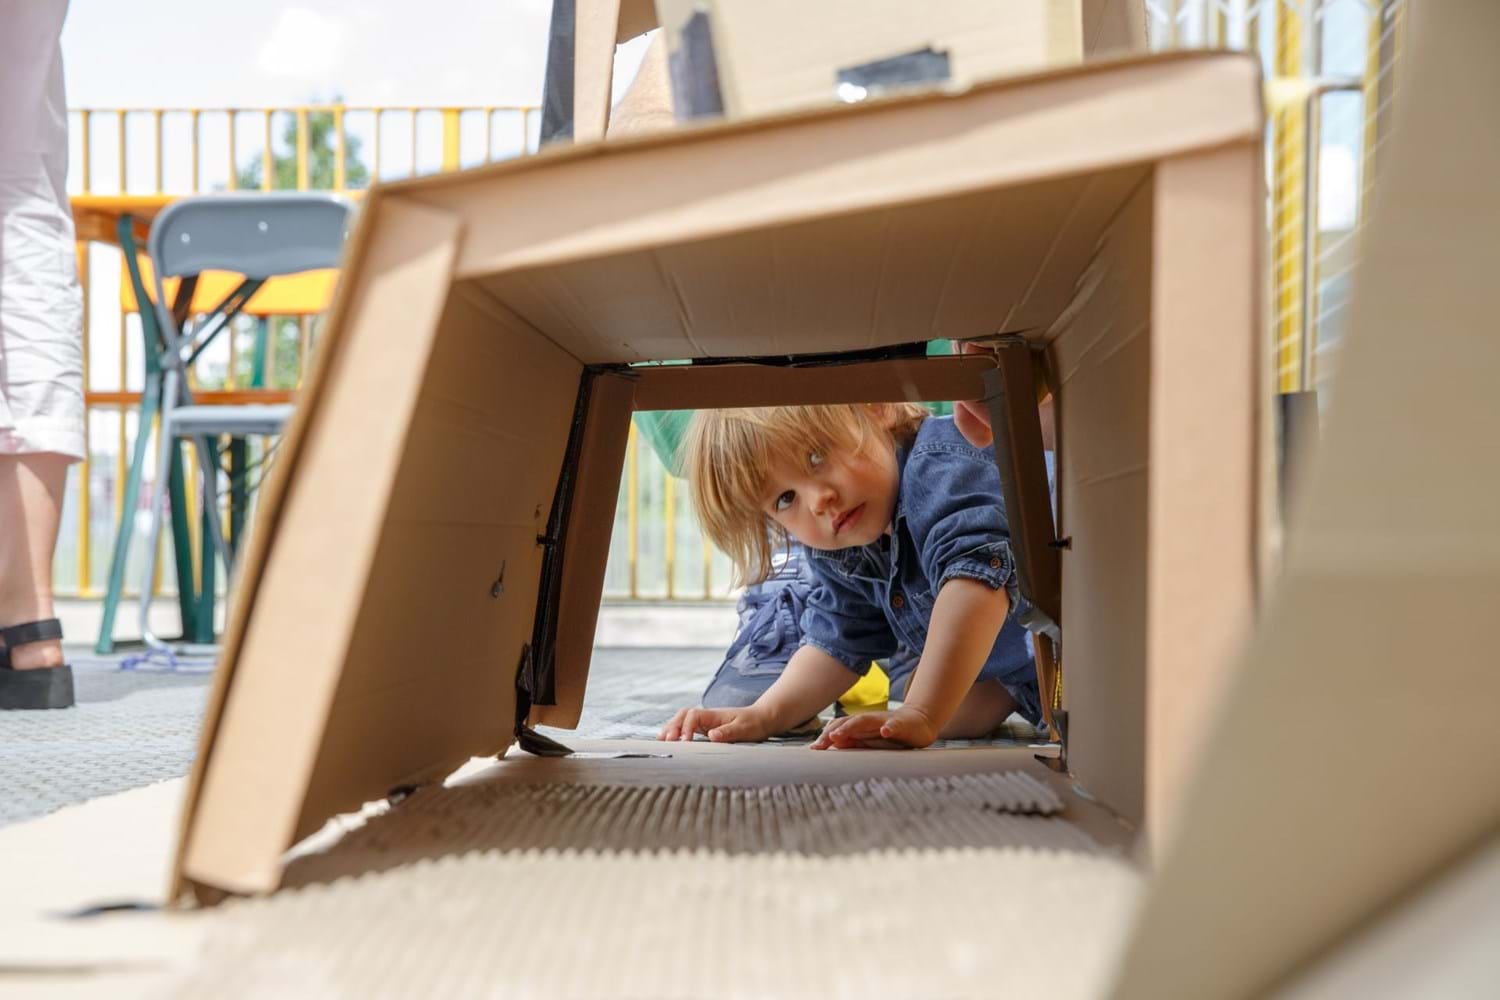 A child peers through a wooden play structure